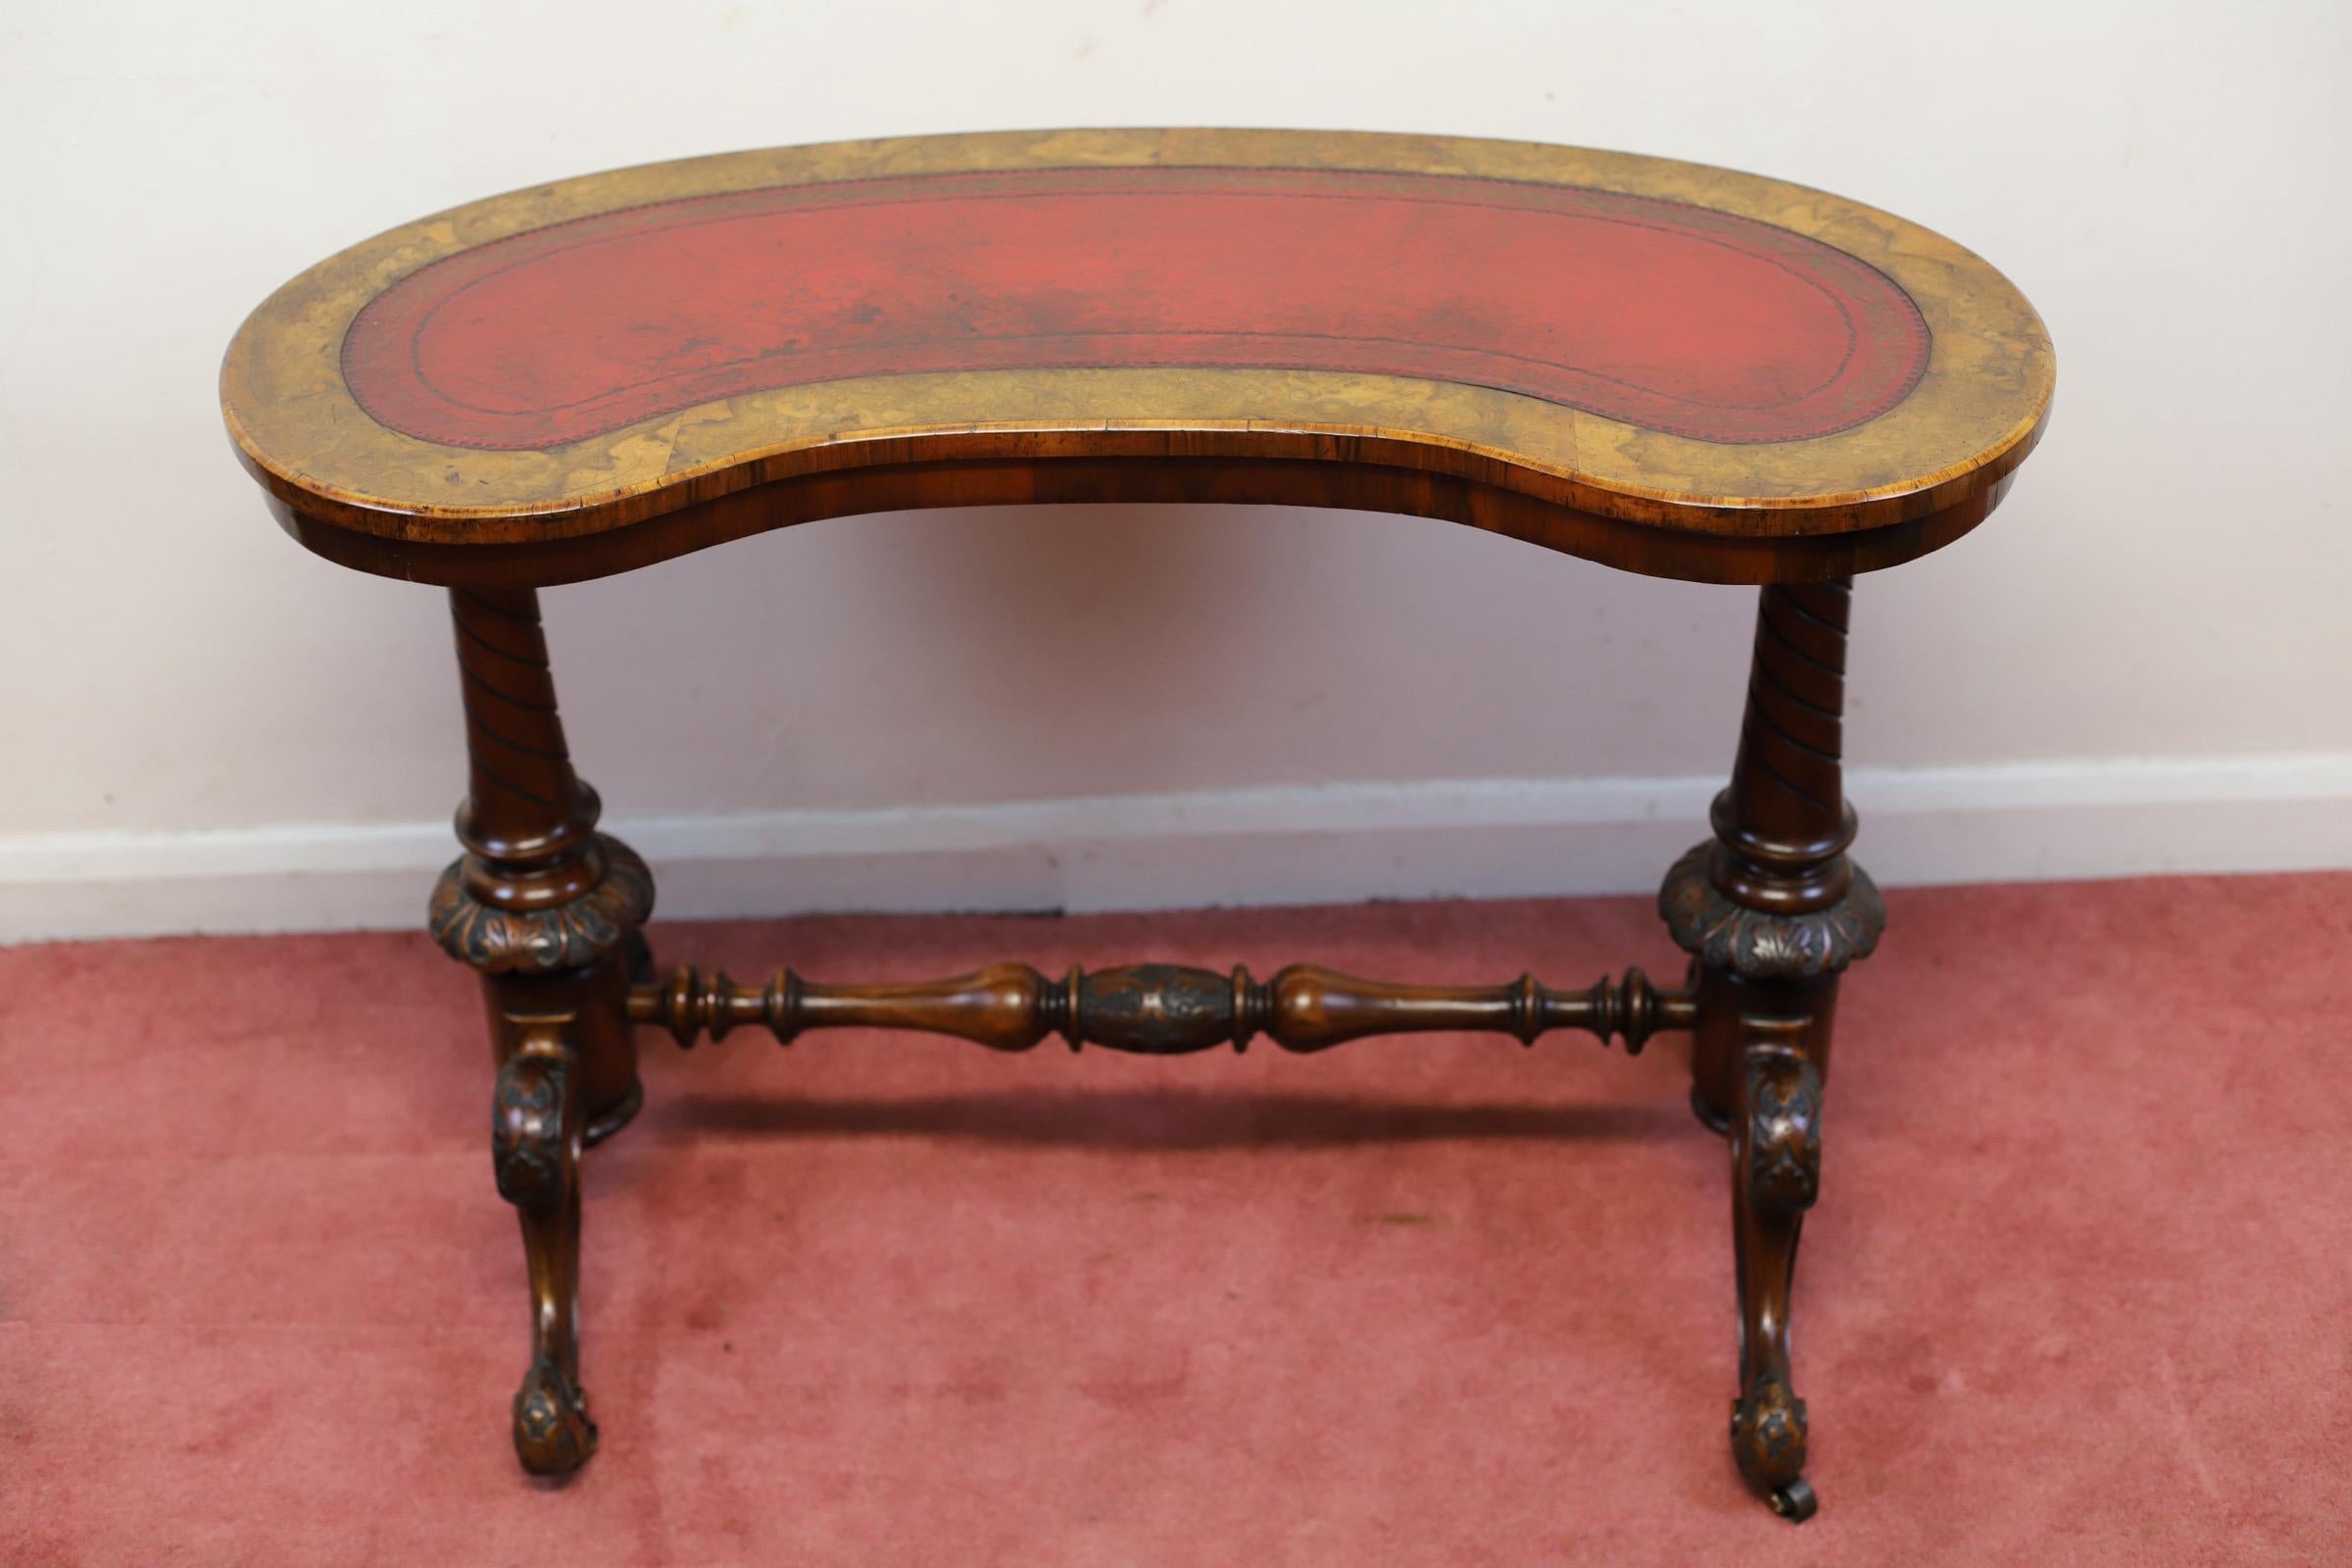 British Lovely Mid-Victorian Burr Walnut Kidney Shaped Table  For Sale